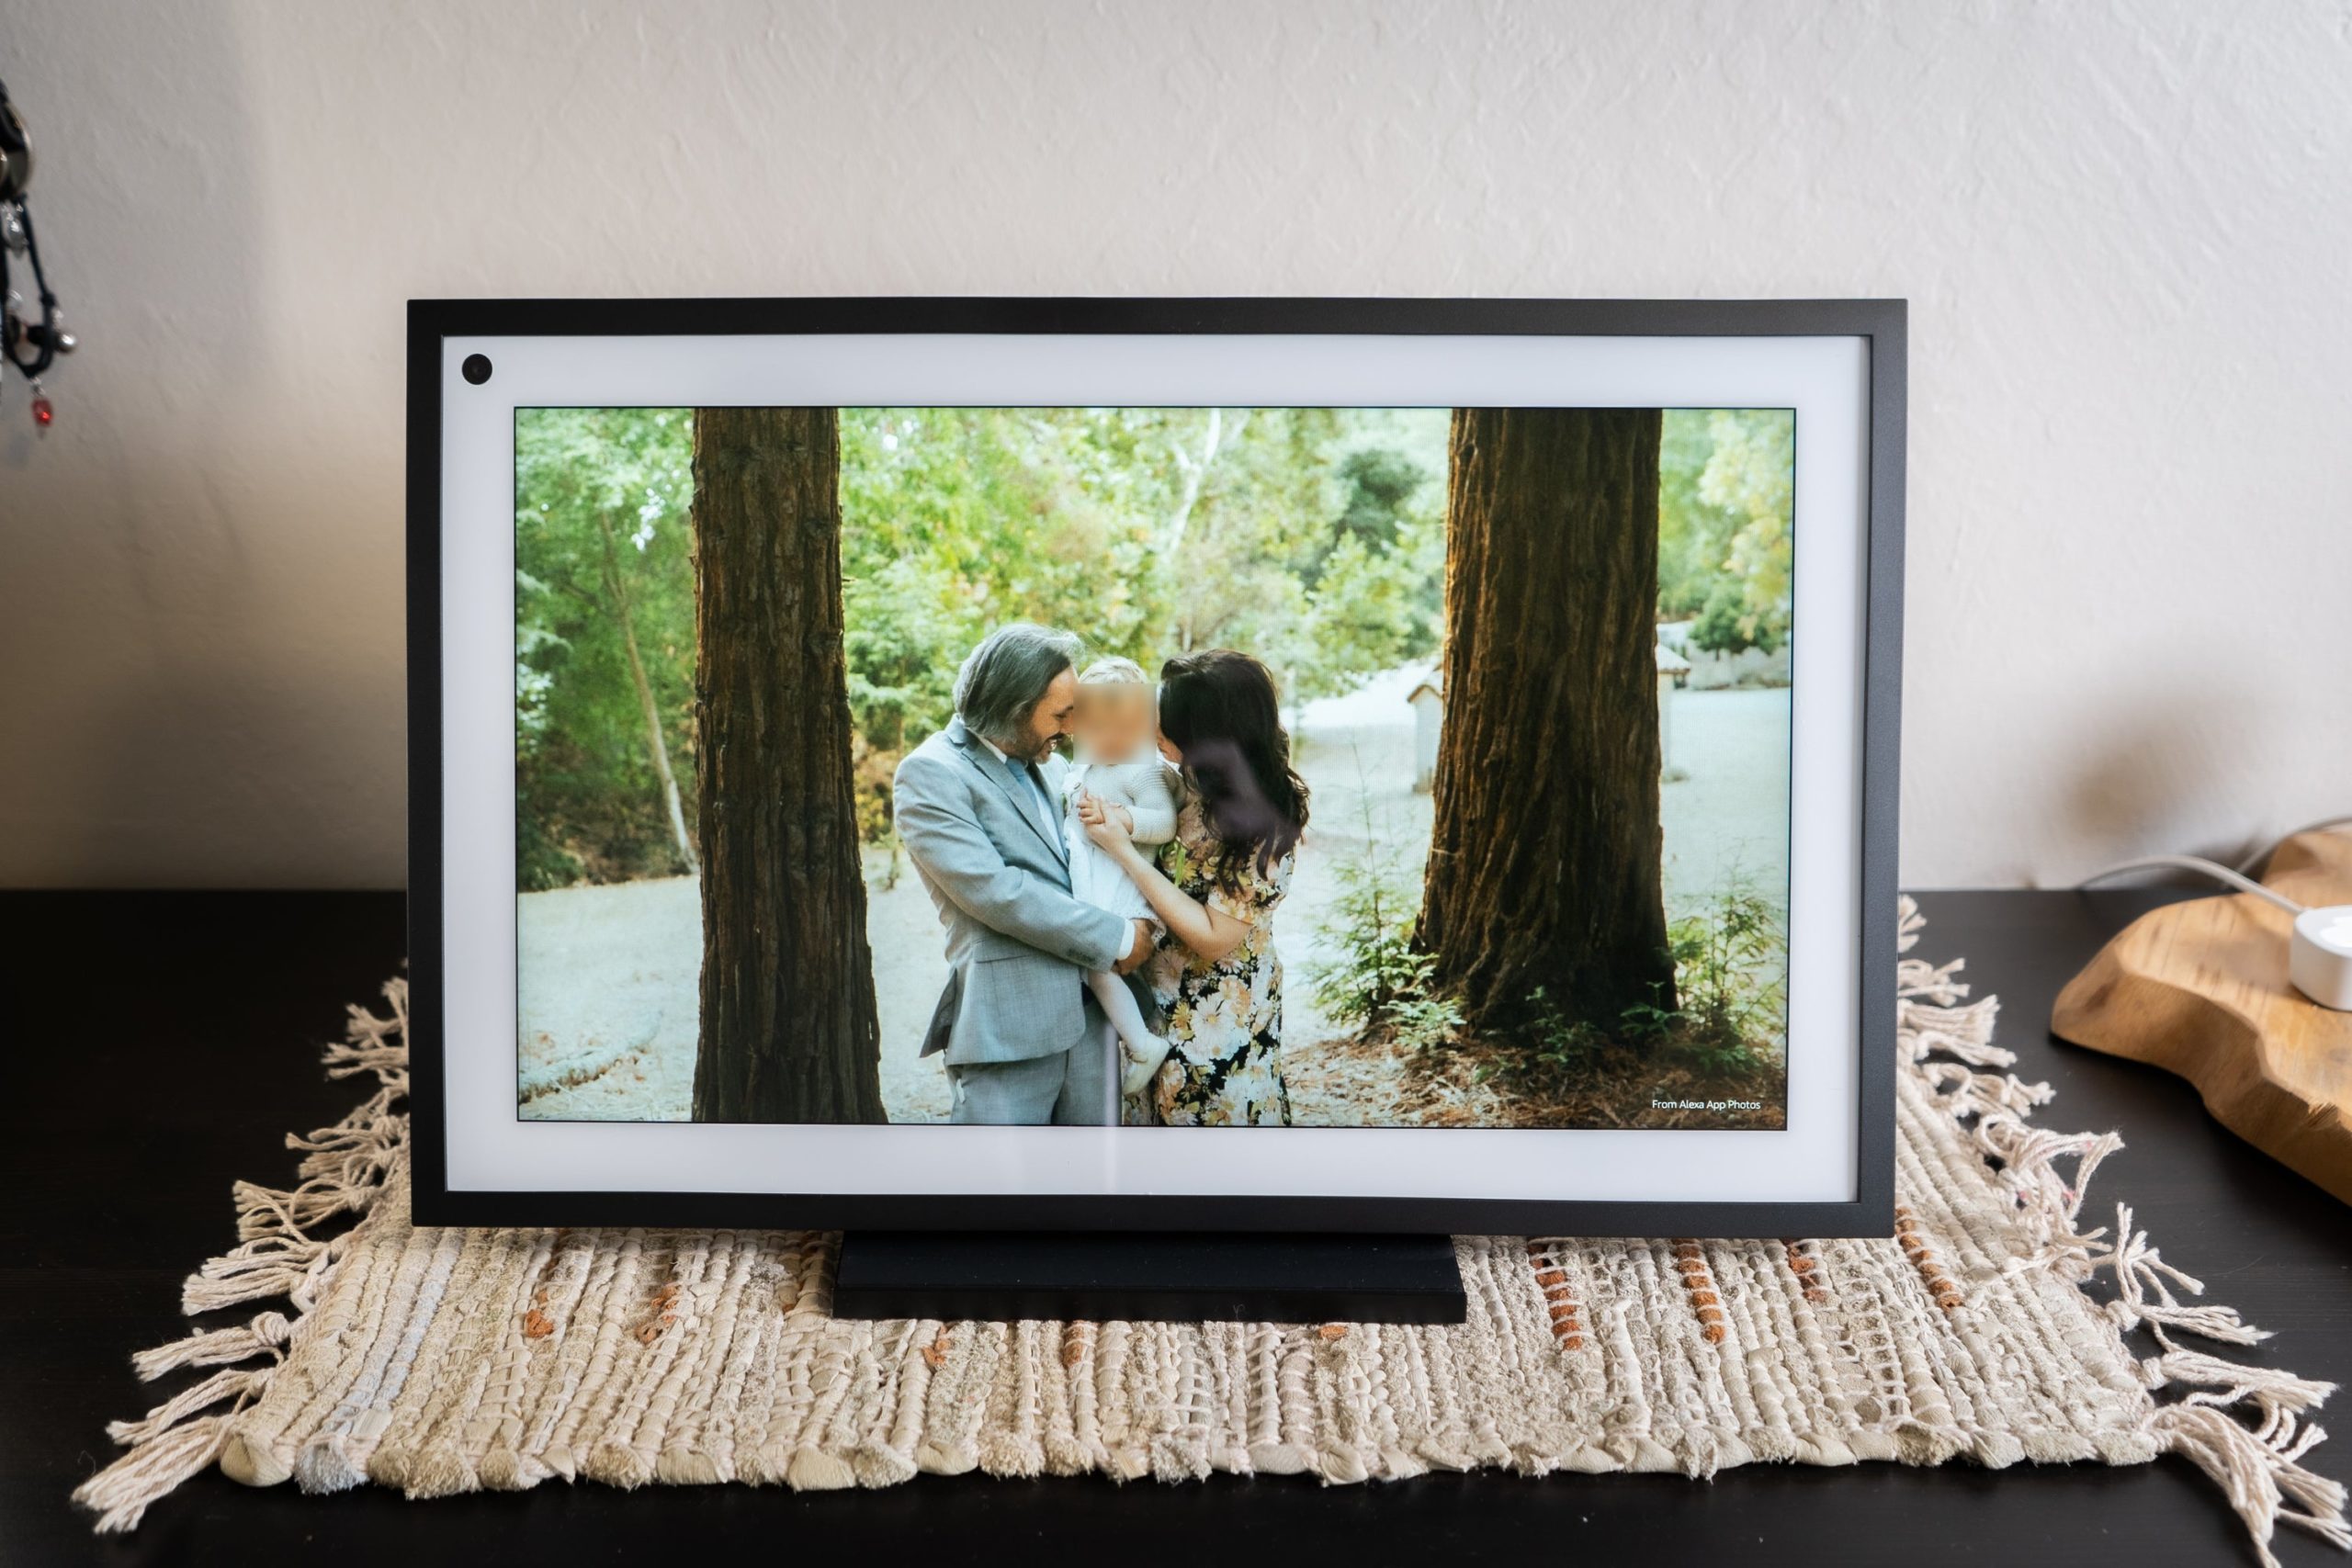 Family photos look awfully good on the Echo Show 15. (Photo: Florence Ion / Gizmodo)